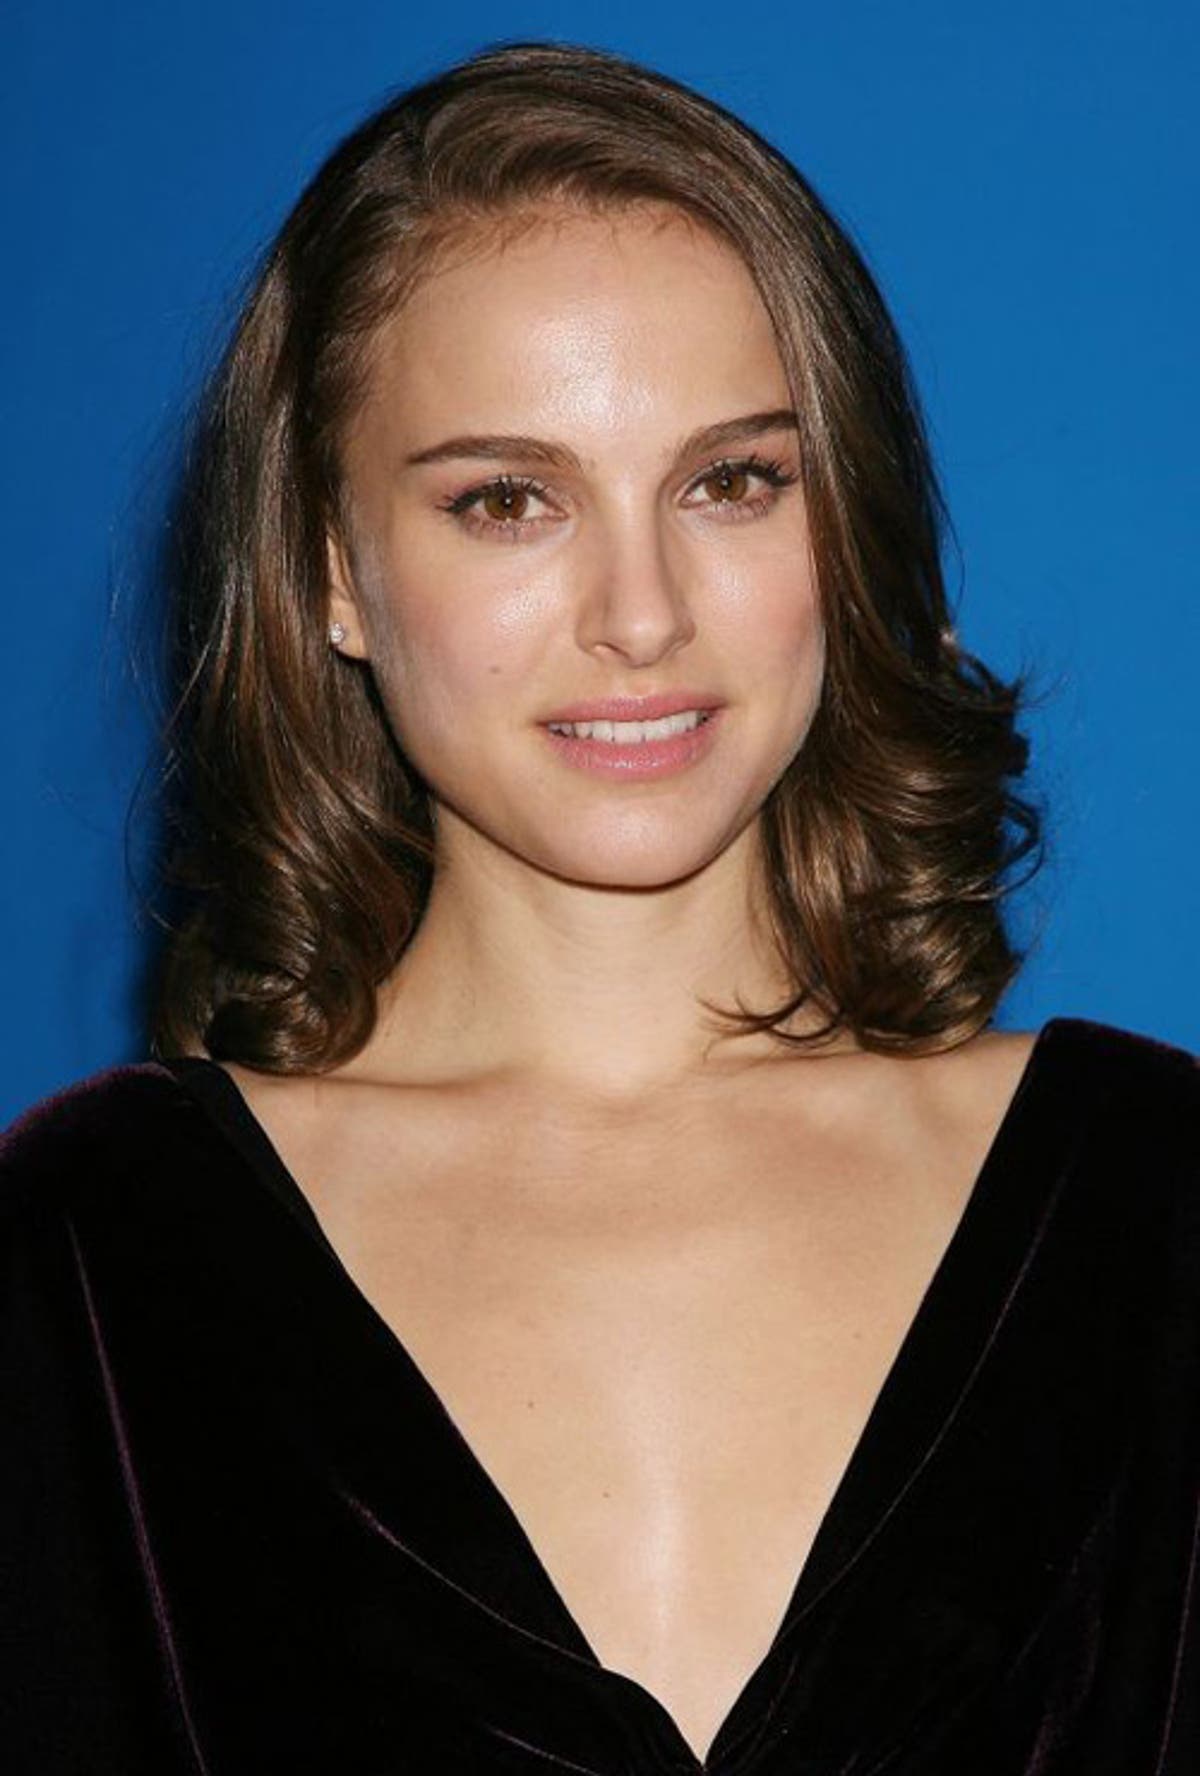 Natalie Portman - more than a woman | The Independent | The Independent